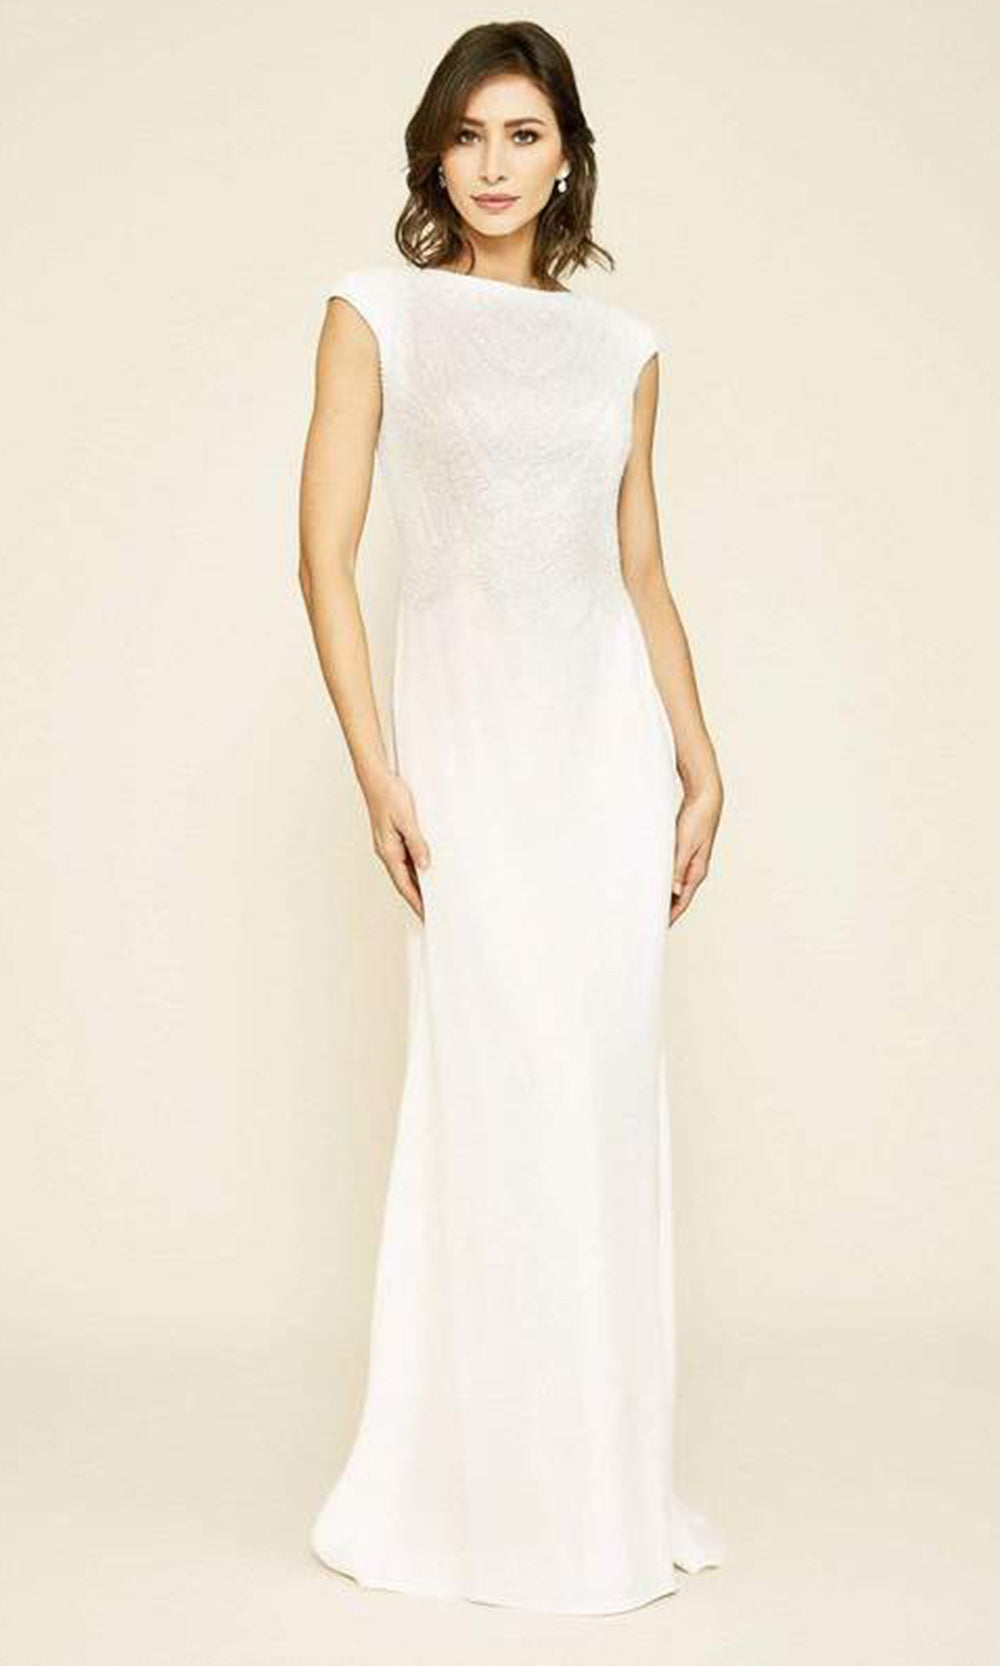 Tadashi Shoji - Rania Embroidered Beading Crepe Gown BKV19532LBR - 1 pc Ivory In Size 6 Available CCSALE 6 / Ivory